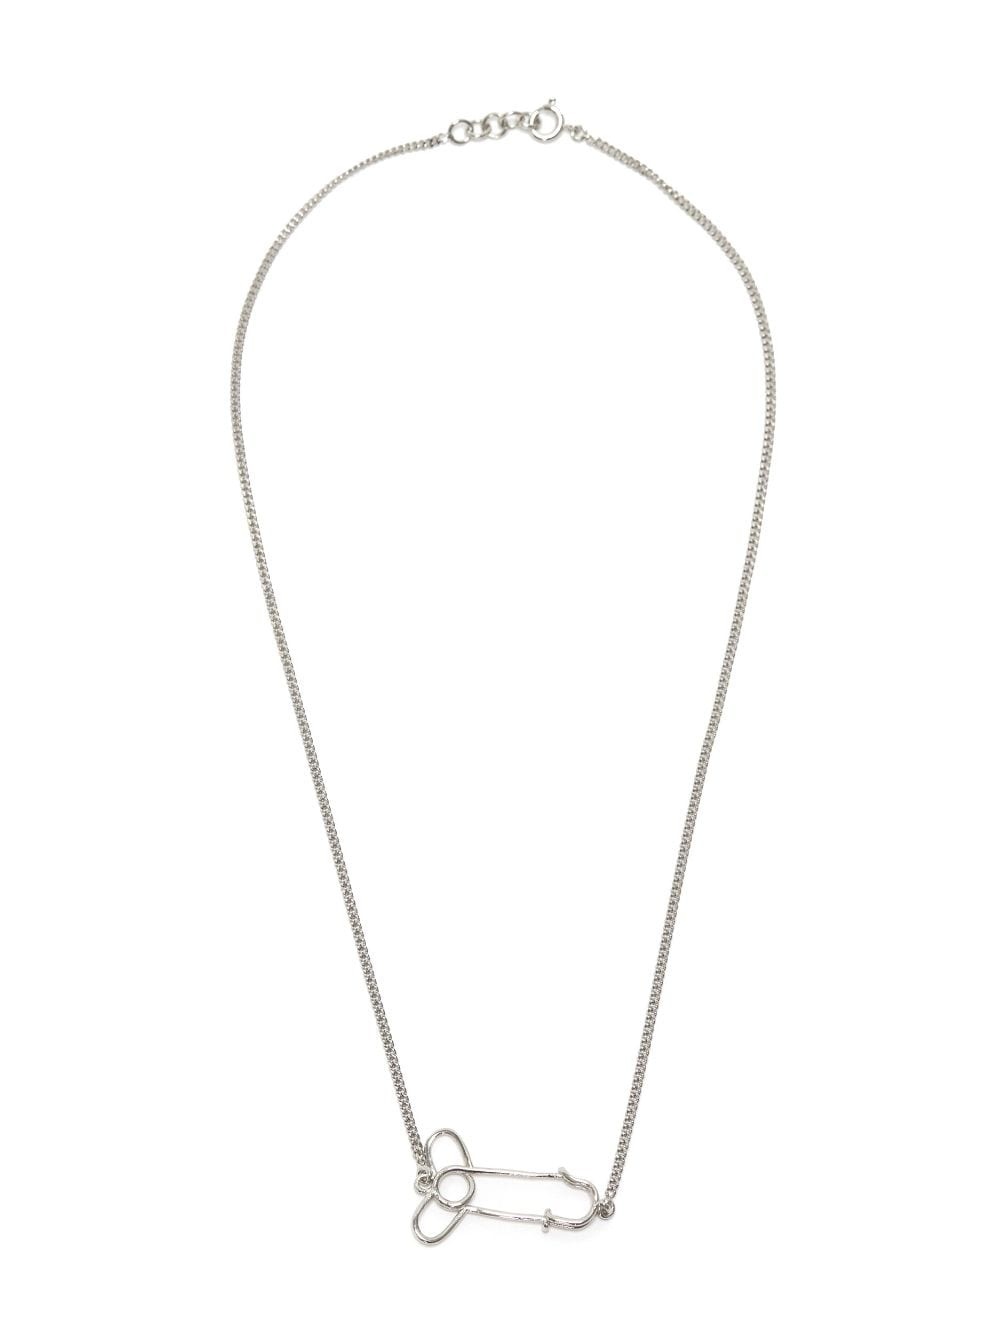 safety-pin pendant necklace - 2